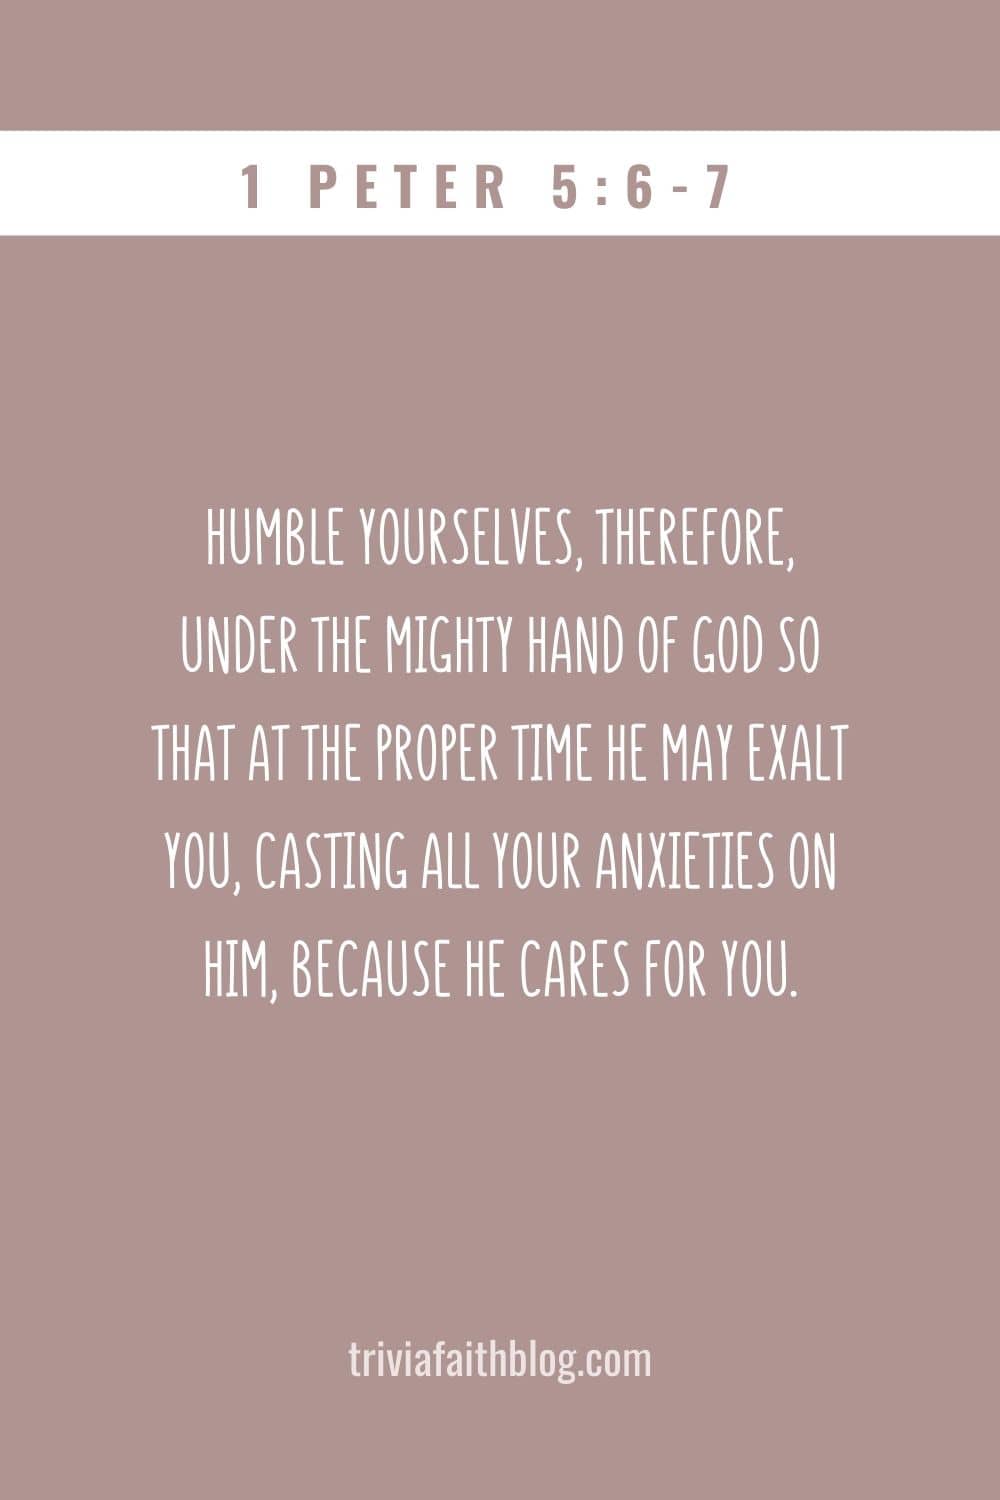 Humble yourselves, therefore, under the mighty hand of God so that at the proper time he may exalt you